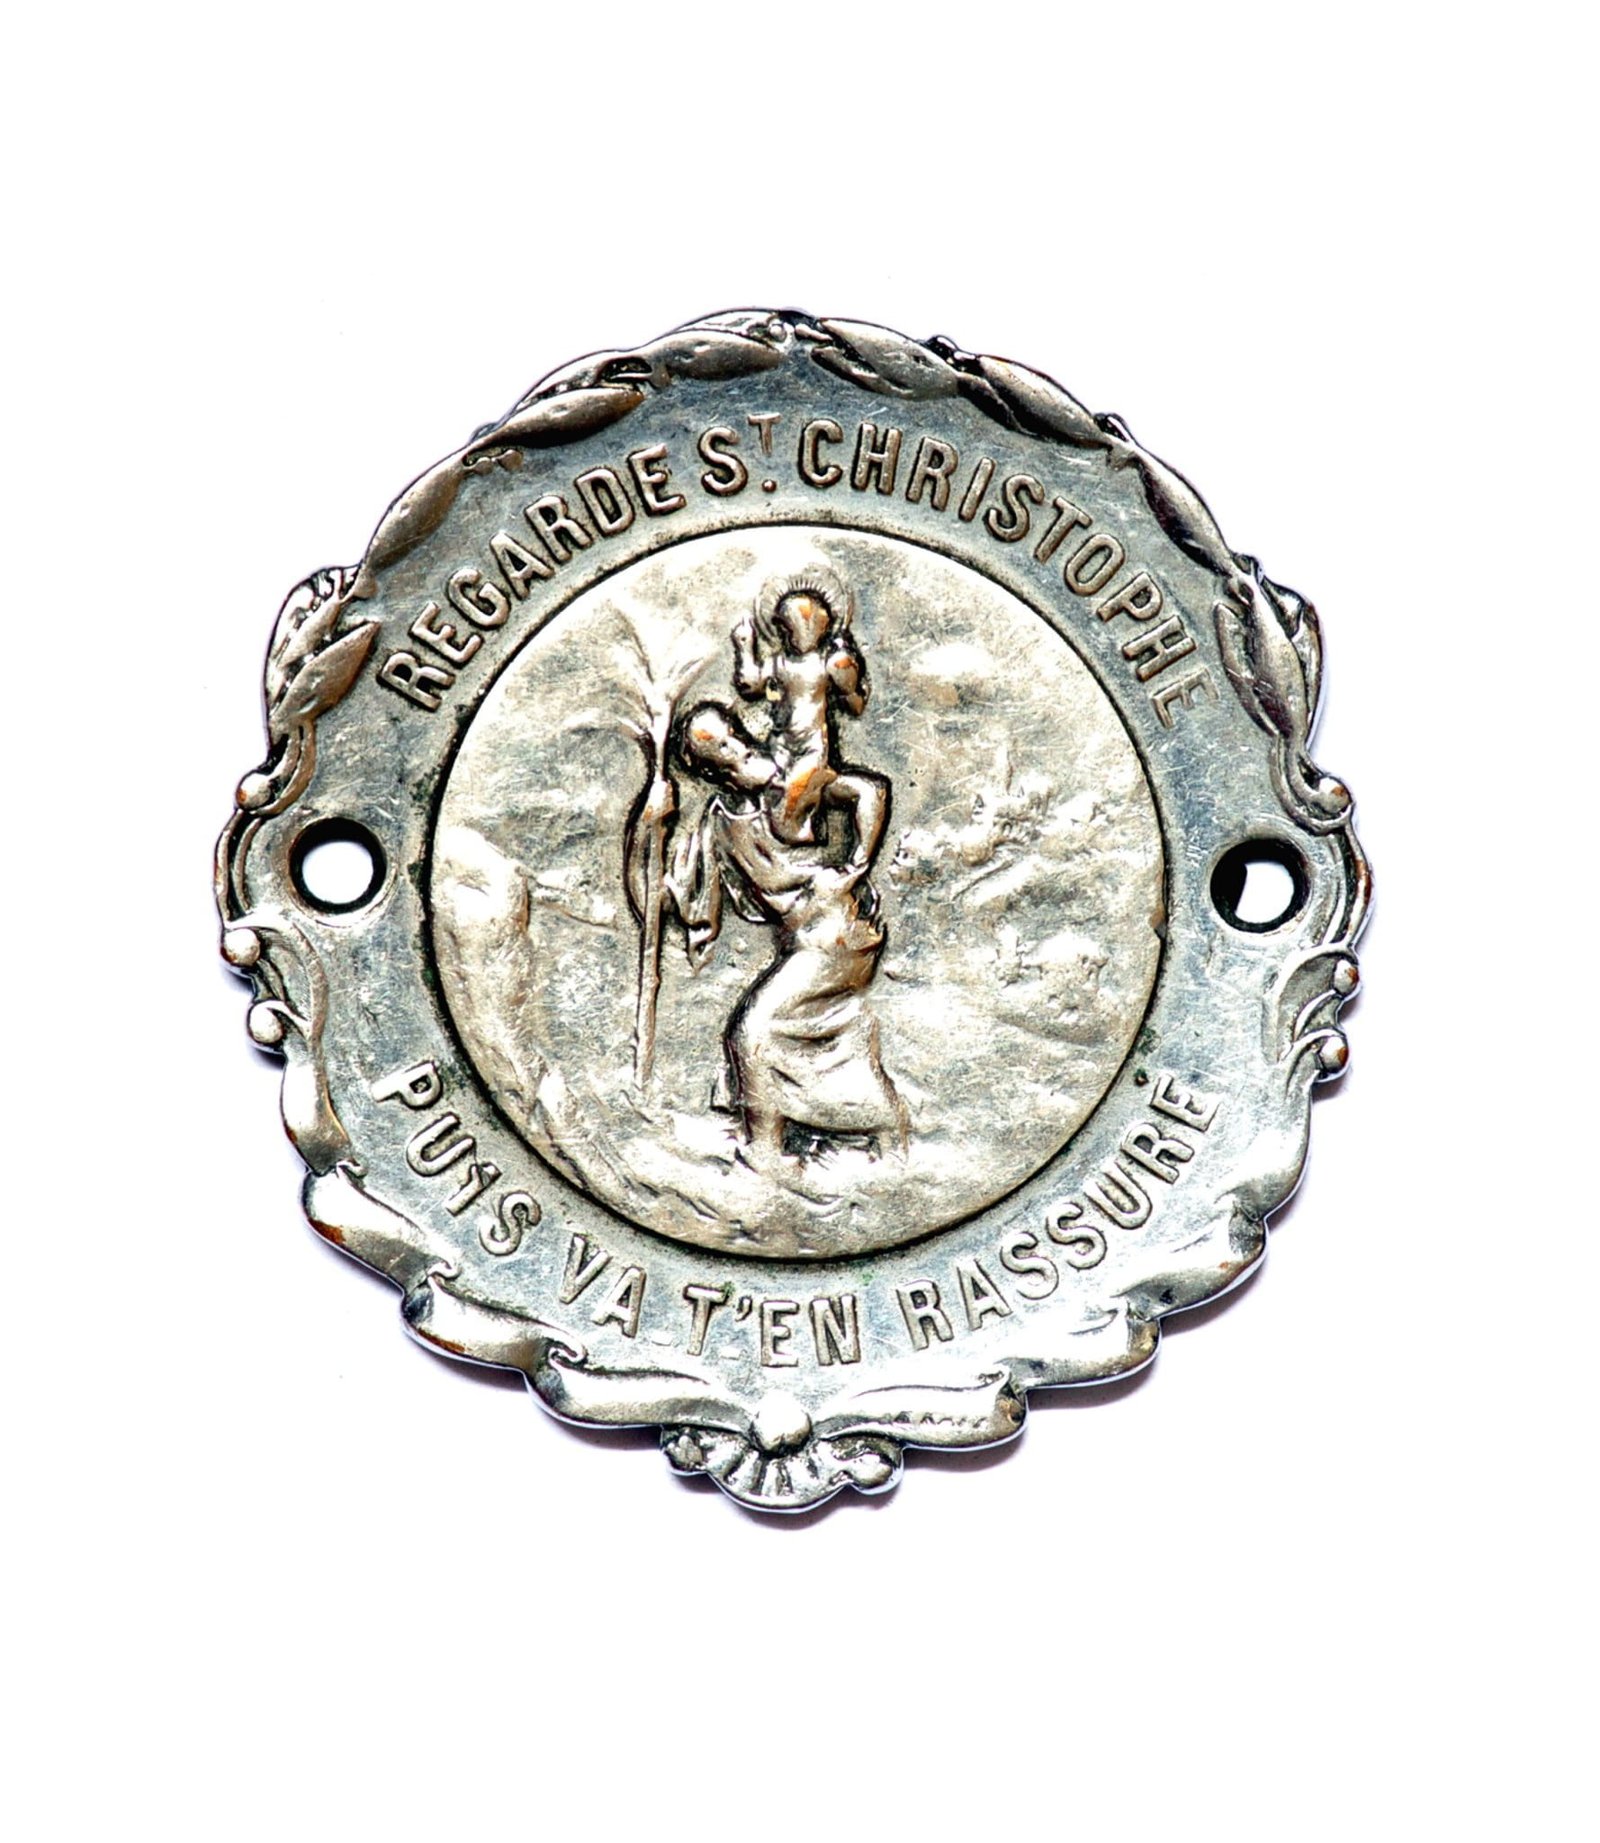 Impressive Saint Christopher's badge by Emile Katz. Measures 65mm. Silver plated bronze. Very good condition. Minor detail lost due to polish. Signed E.Katz. This is exactly the badge described and photographed in the book by Maximiliano Garay "Saint Christophe - dashboard badges of the golden era of motoring" on page 95.